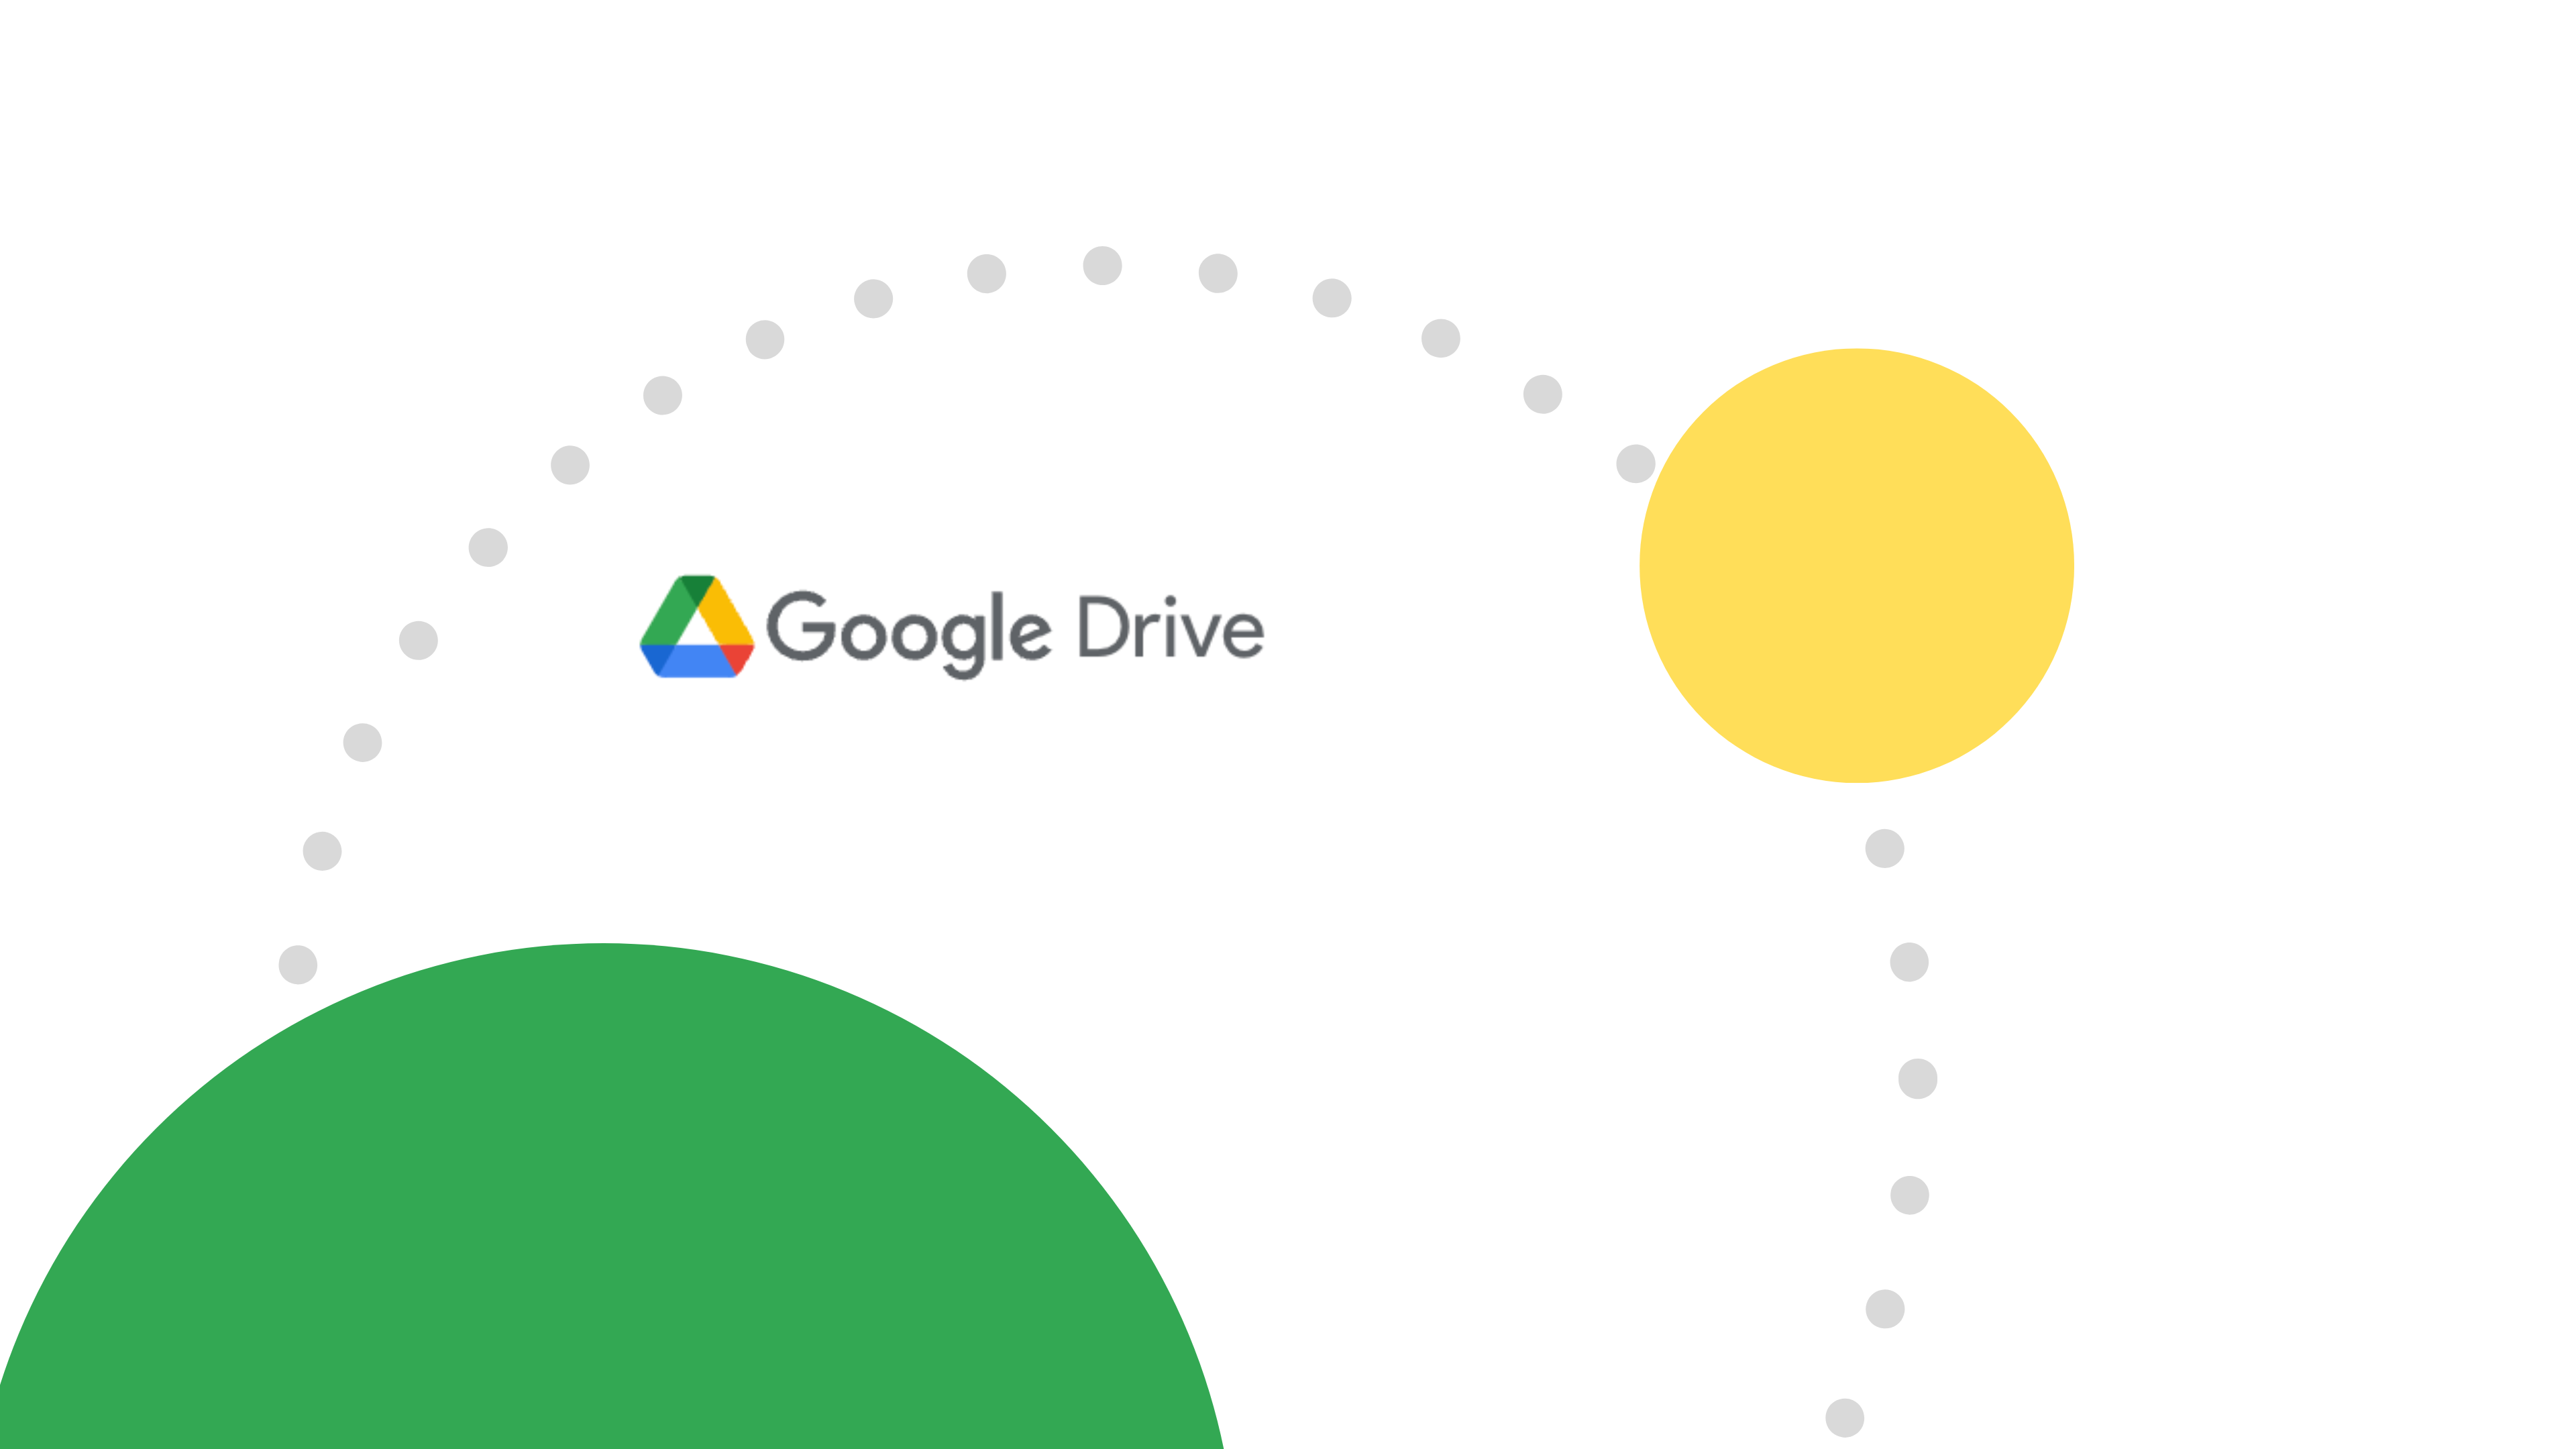 Google Drive logo with circular shapes in green and yellow